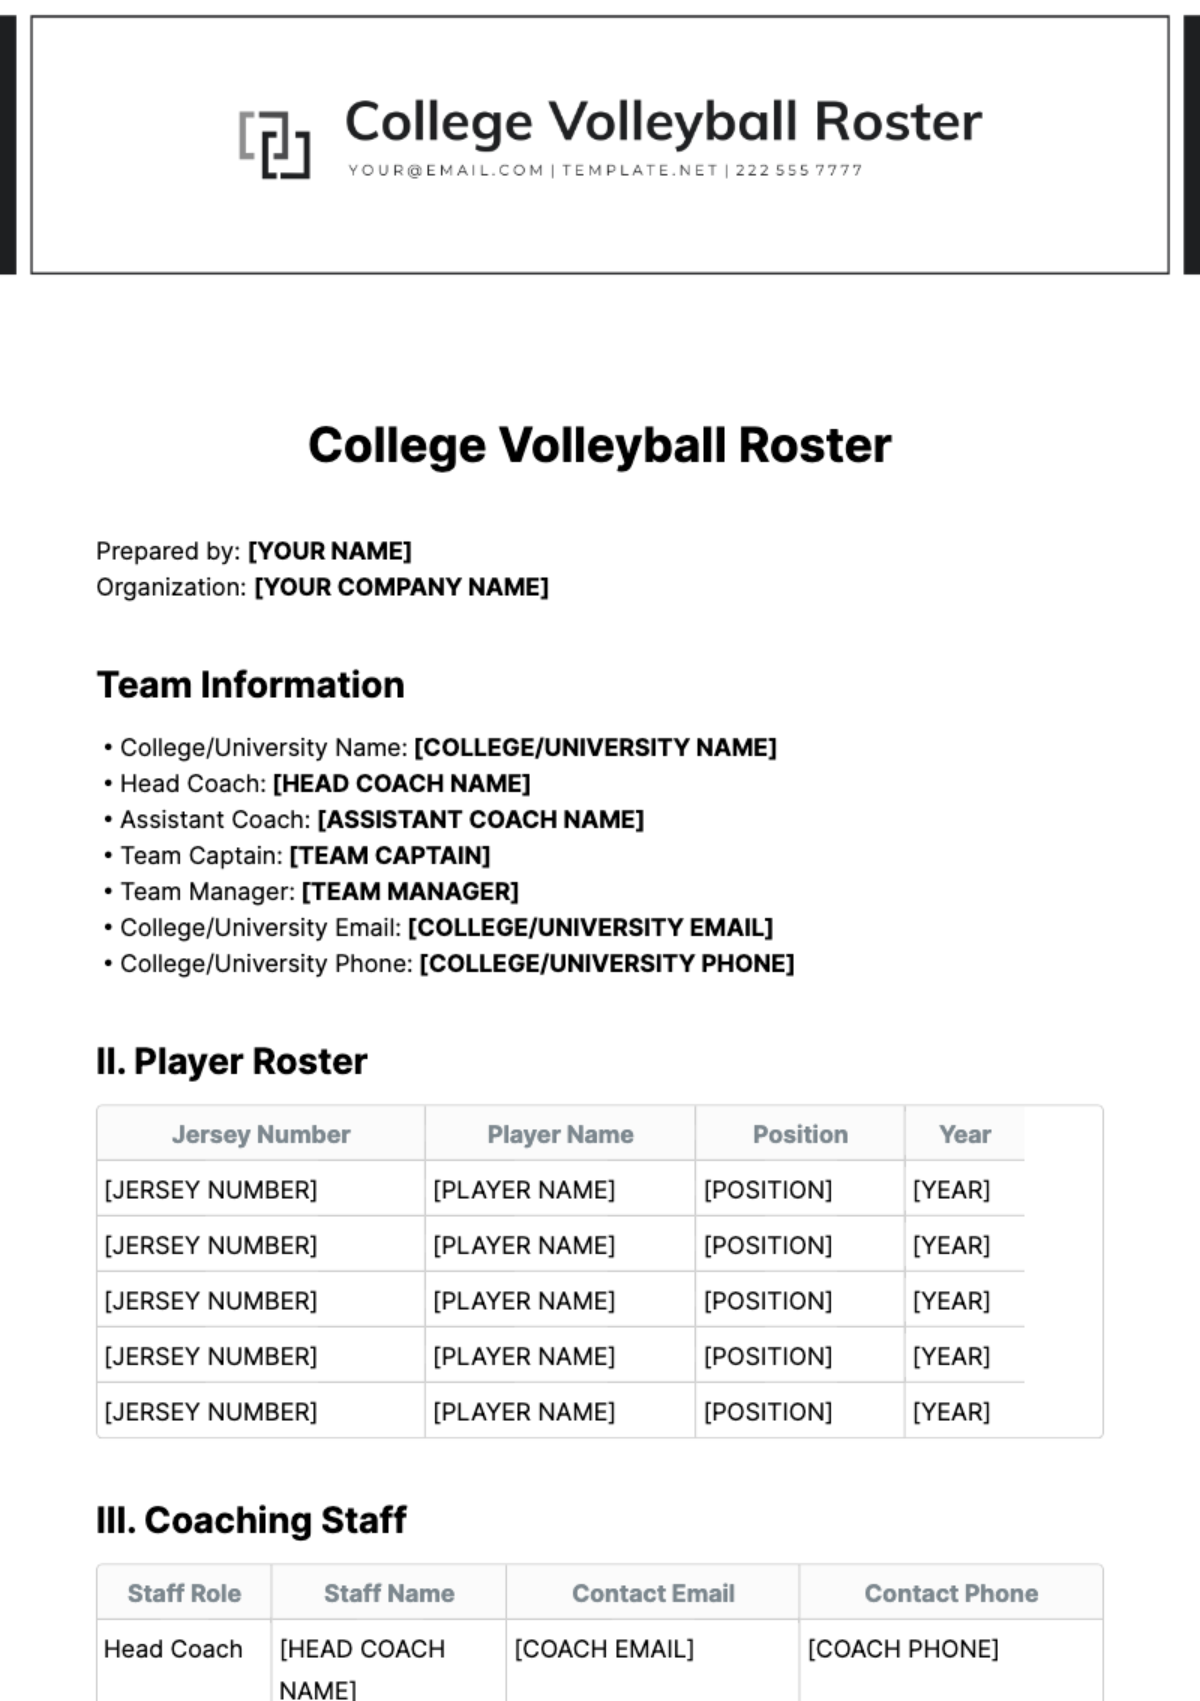 College Volleyball Roster Template